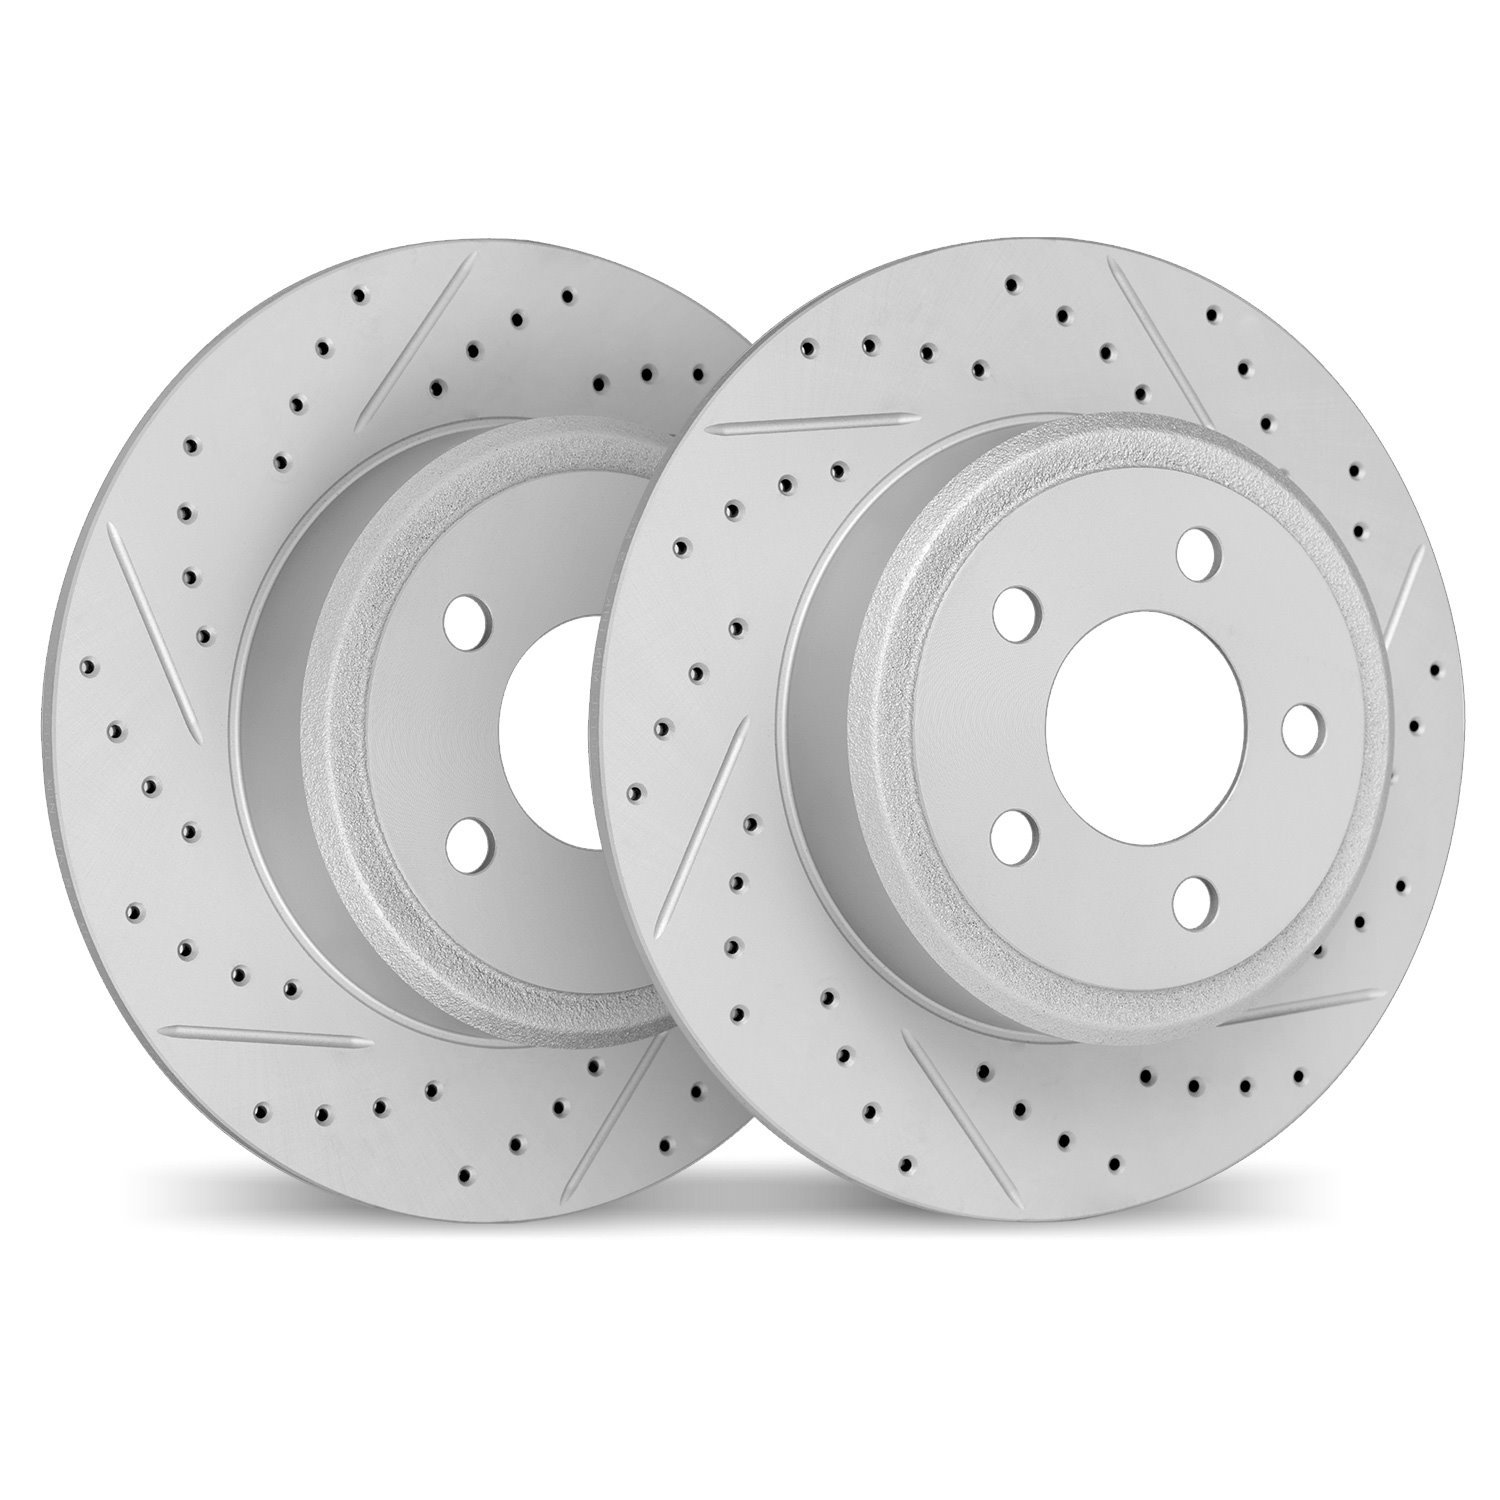 2002-65009 Geoperformance Drilled/Slotted Brake Rotors, 2003-2011 GM, Position: Rear